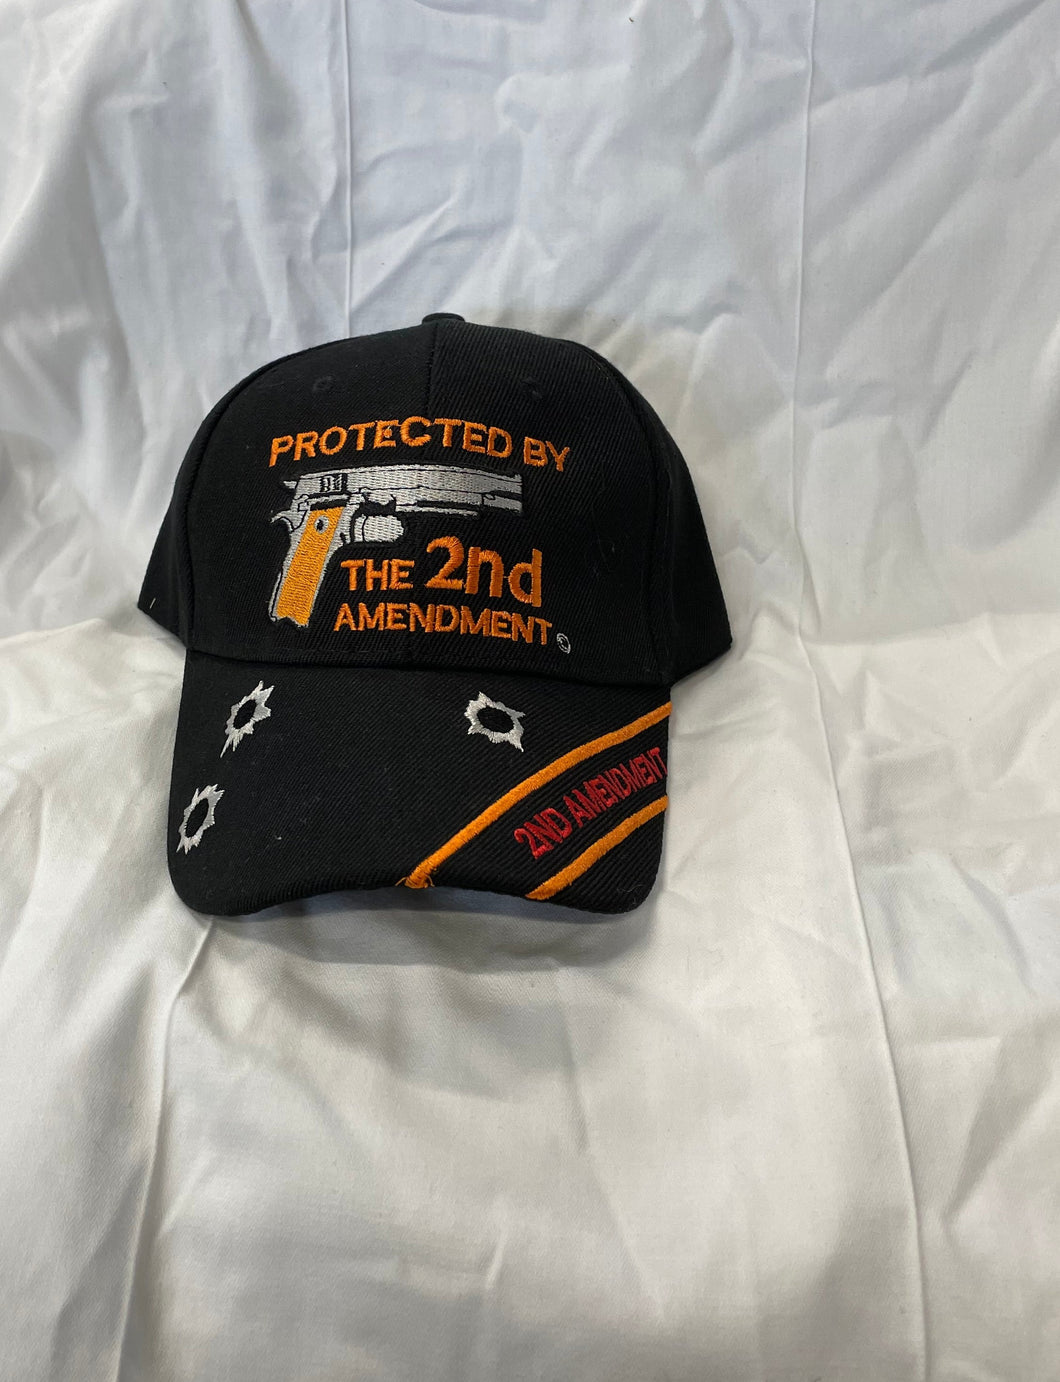 FRONT VIEW OF 2ND AMENDMENT HAT